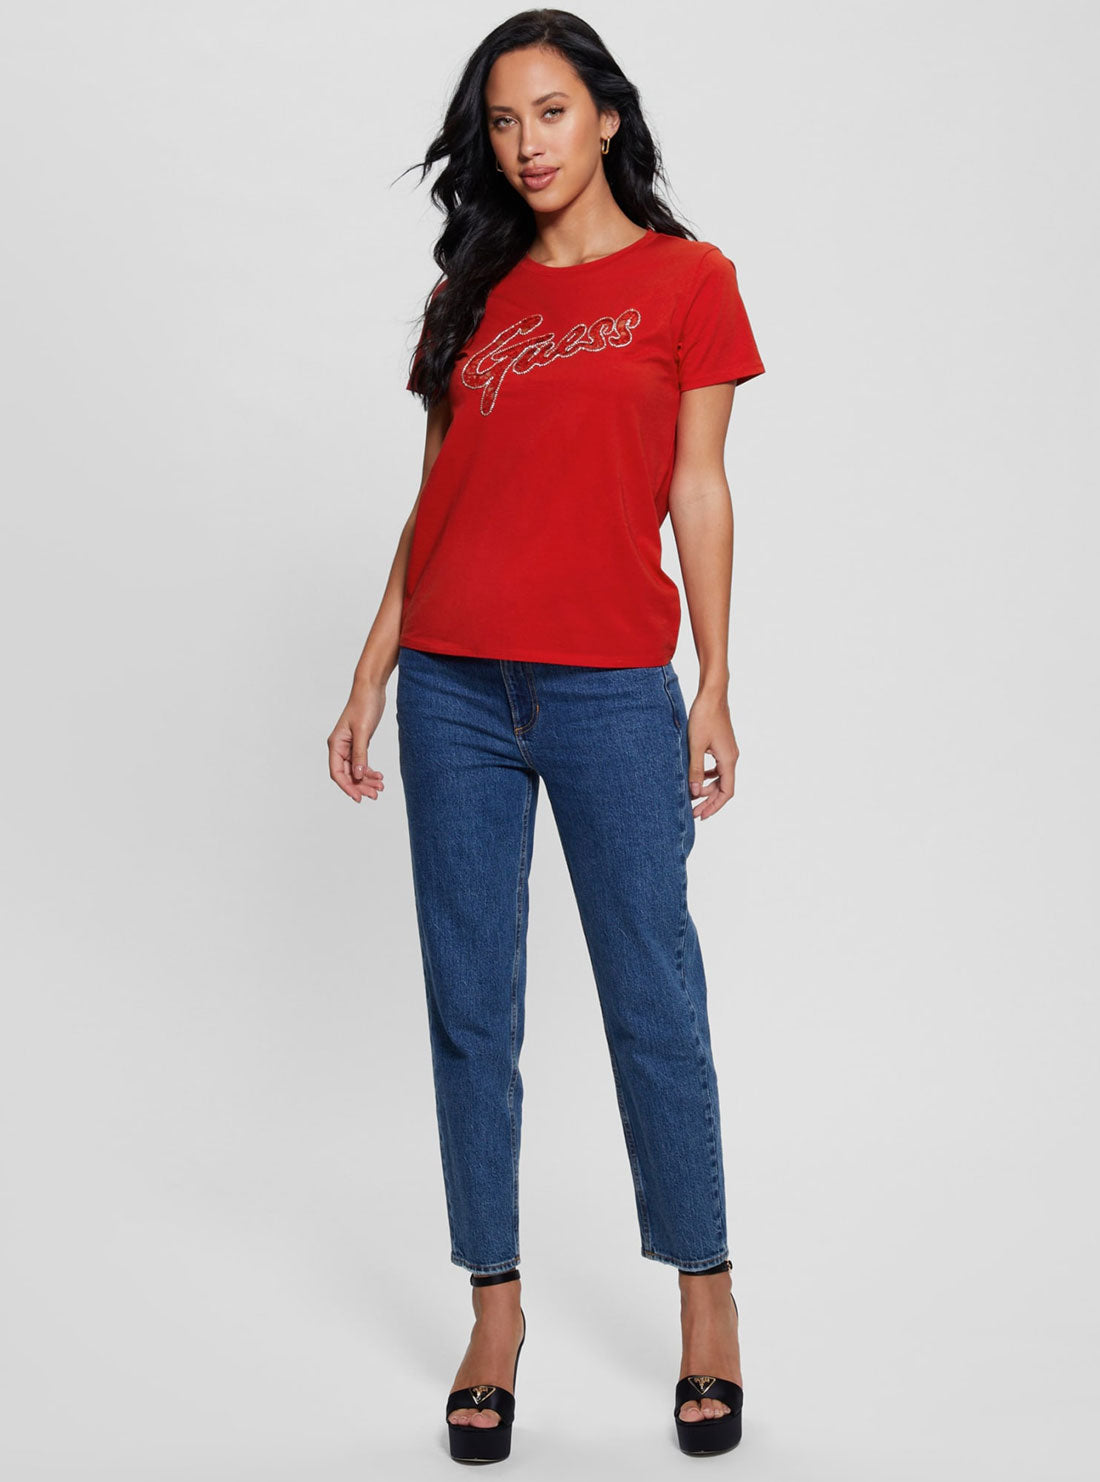 GUESS Red Short Sleeve Lace Logo T-Shirt full view